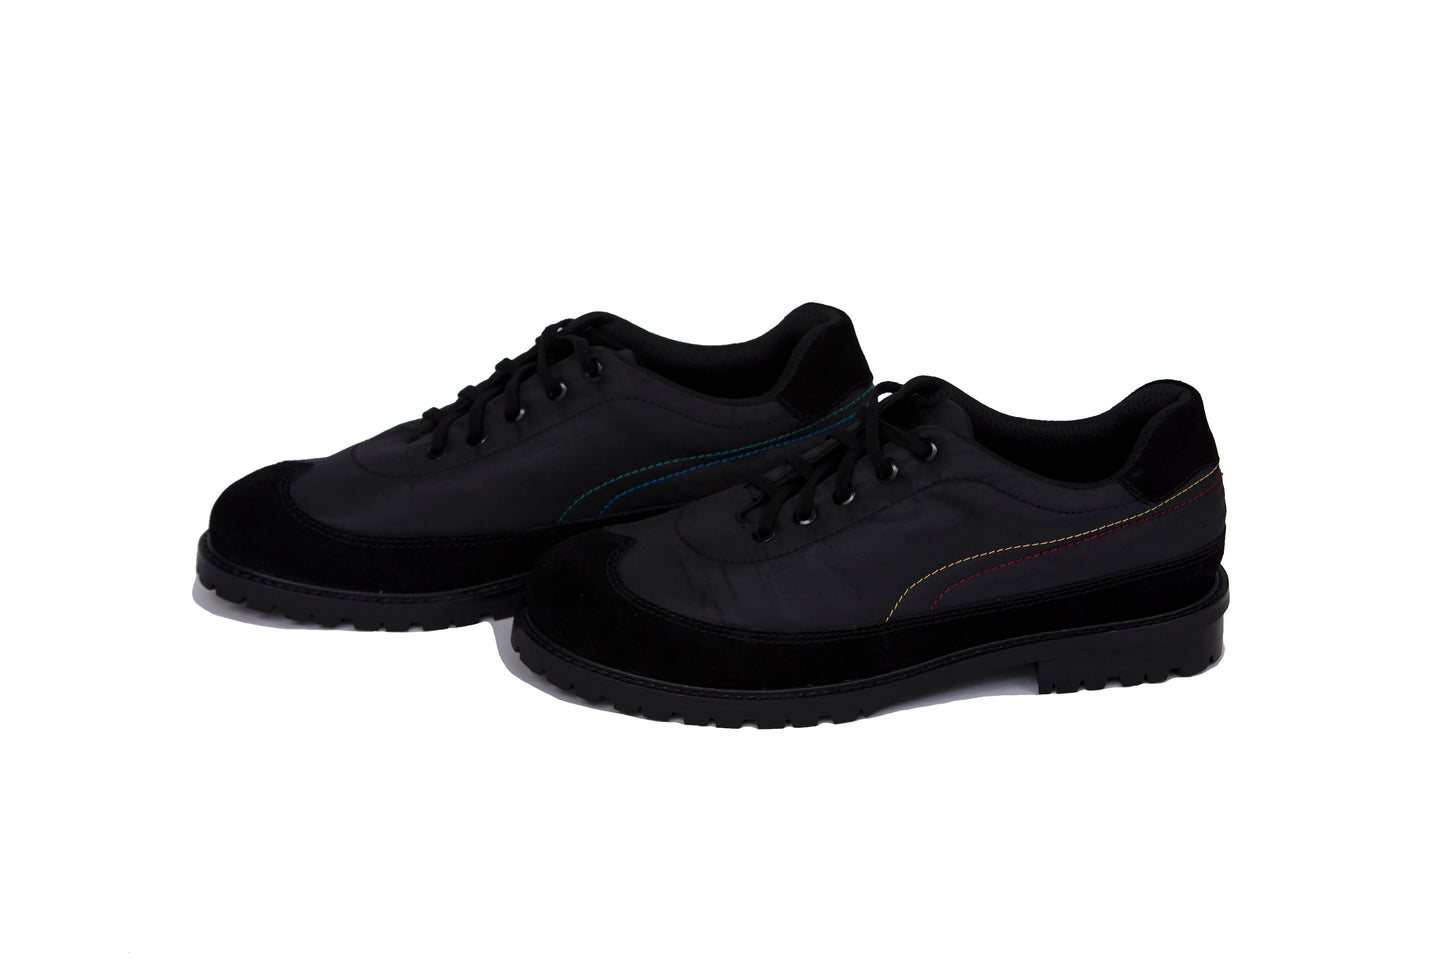 Athlete leather shoes